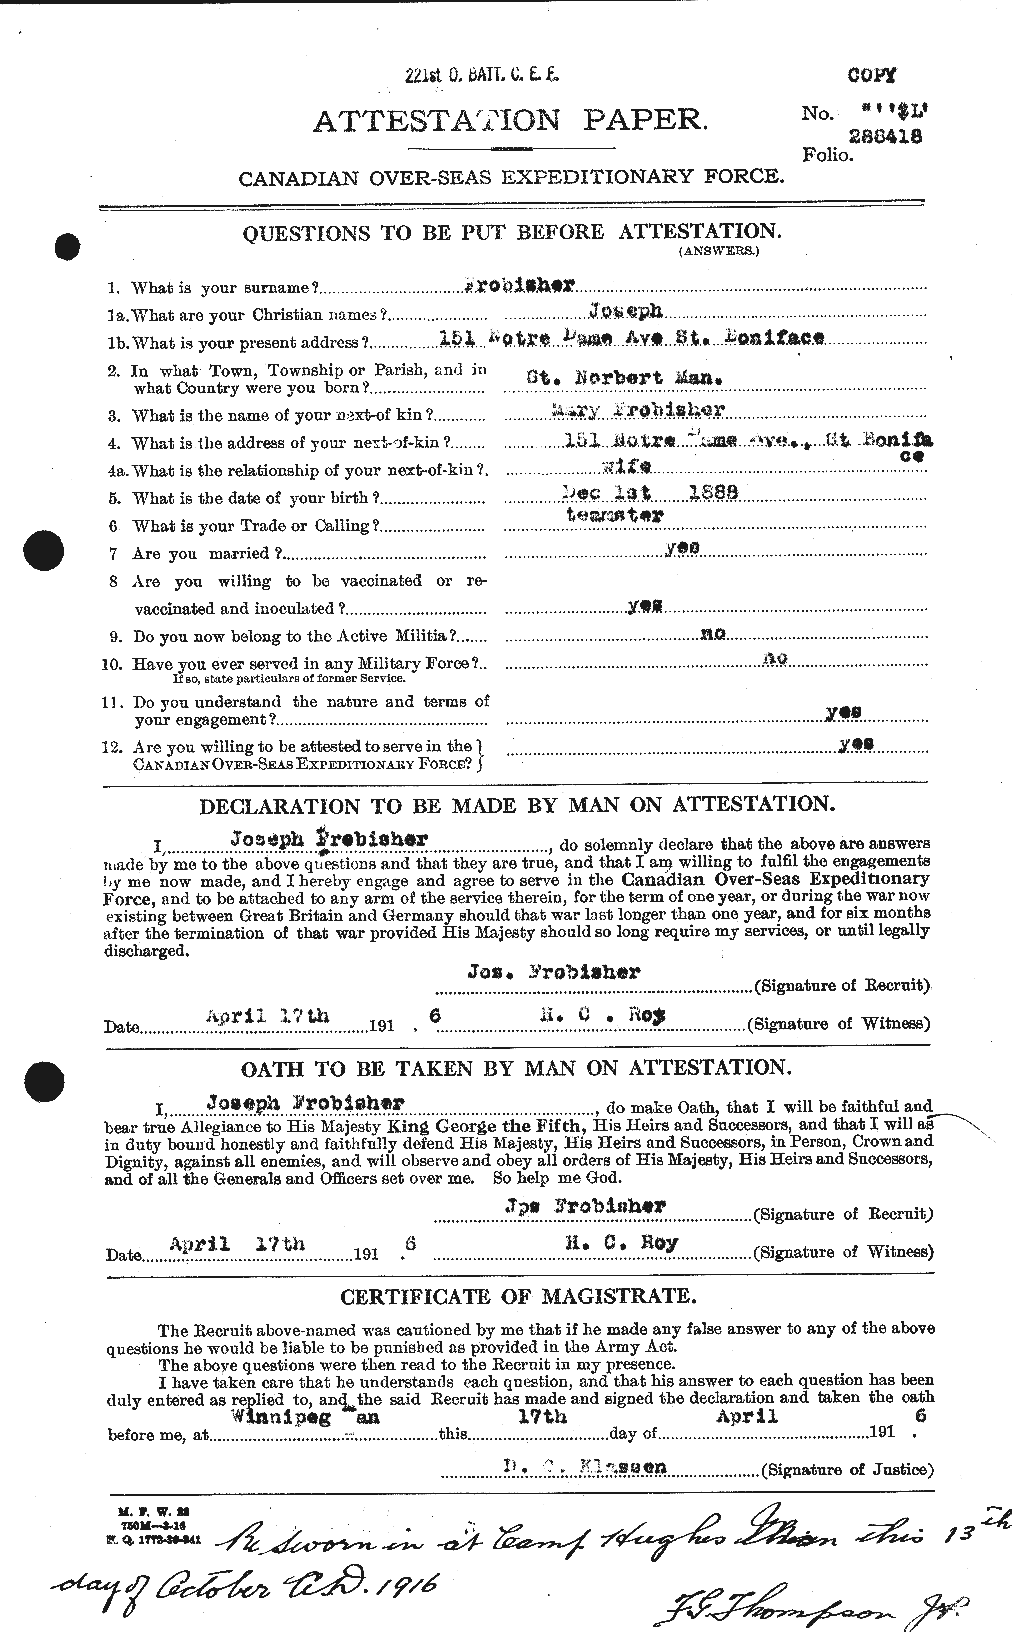 Personnel Records of the First World War - CEF 337605a